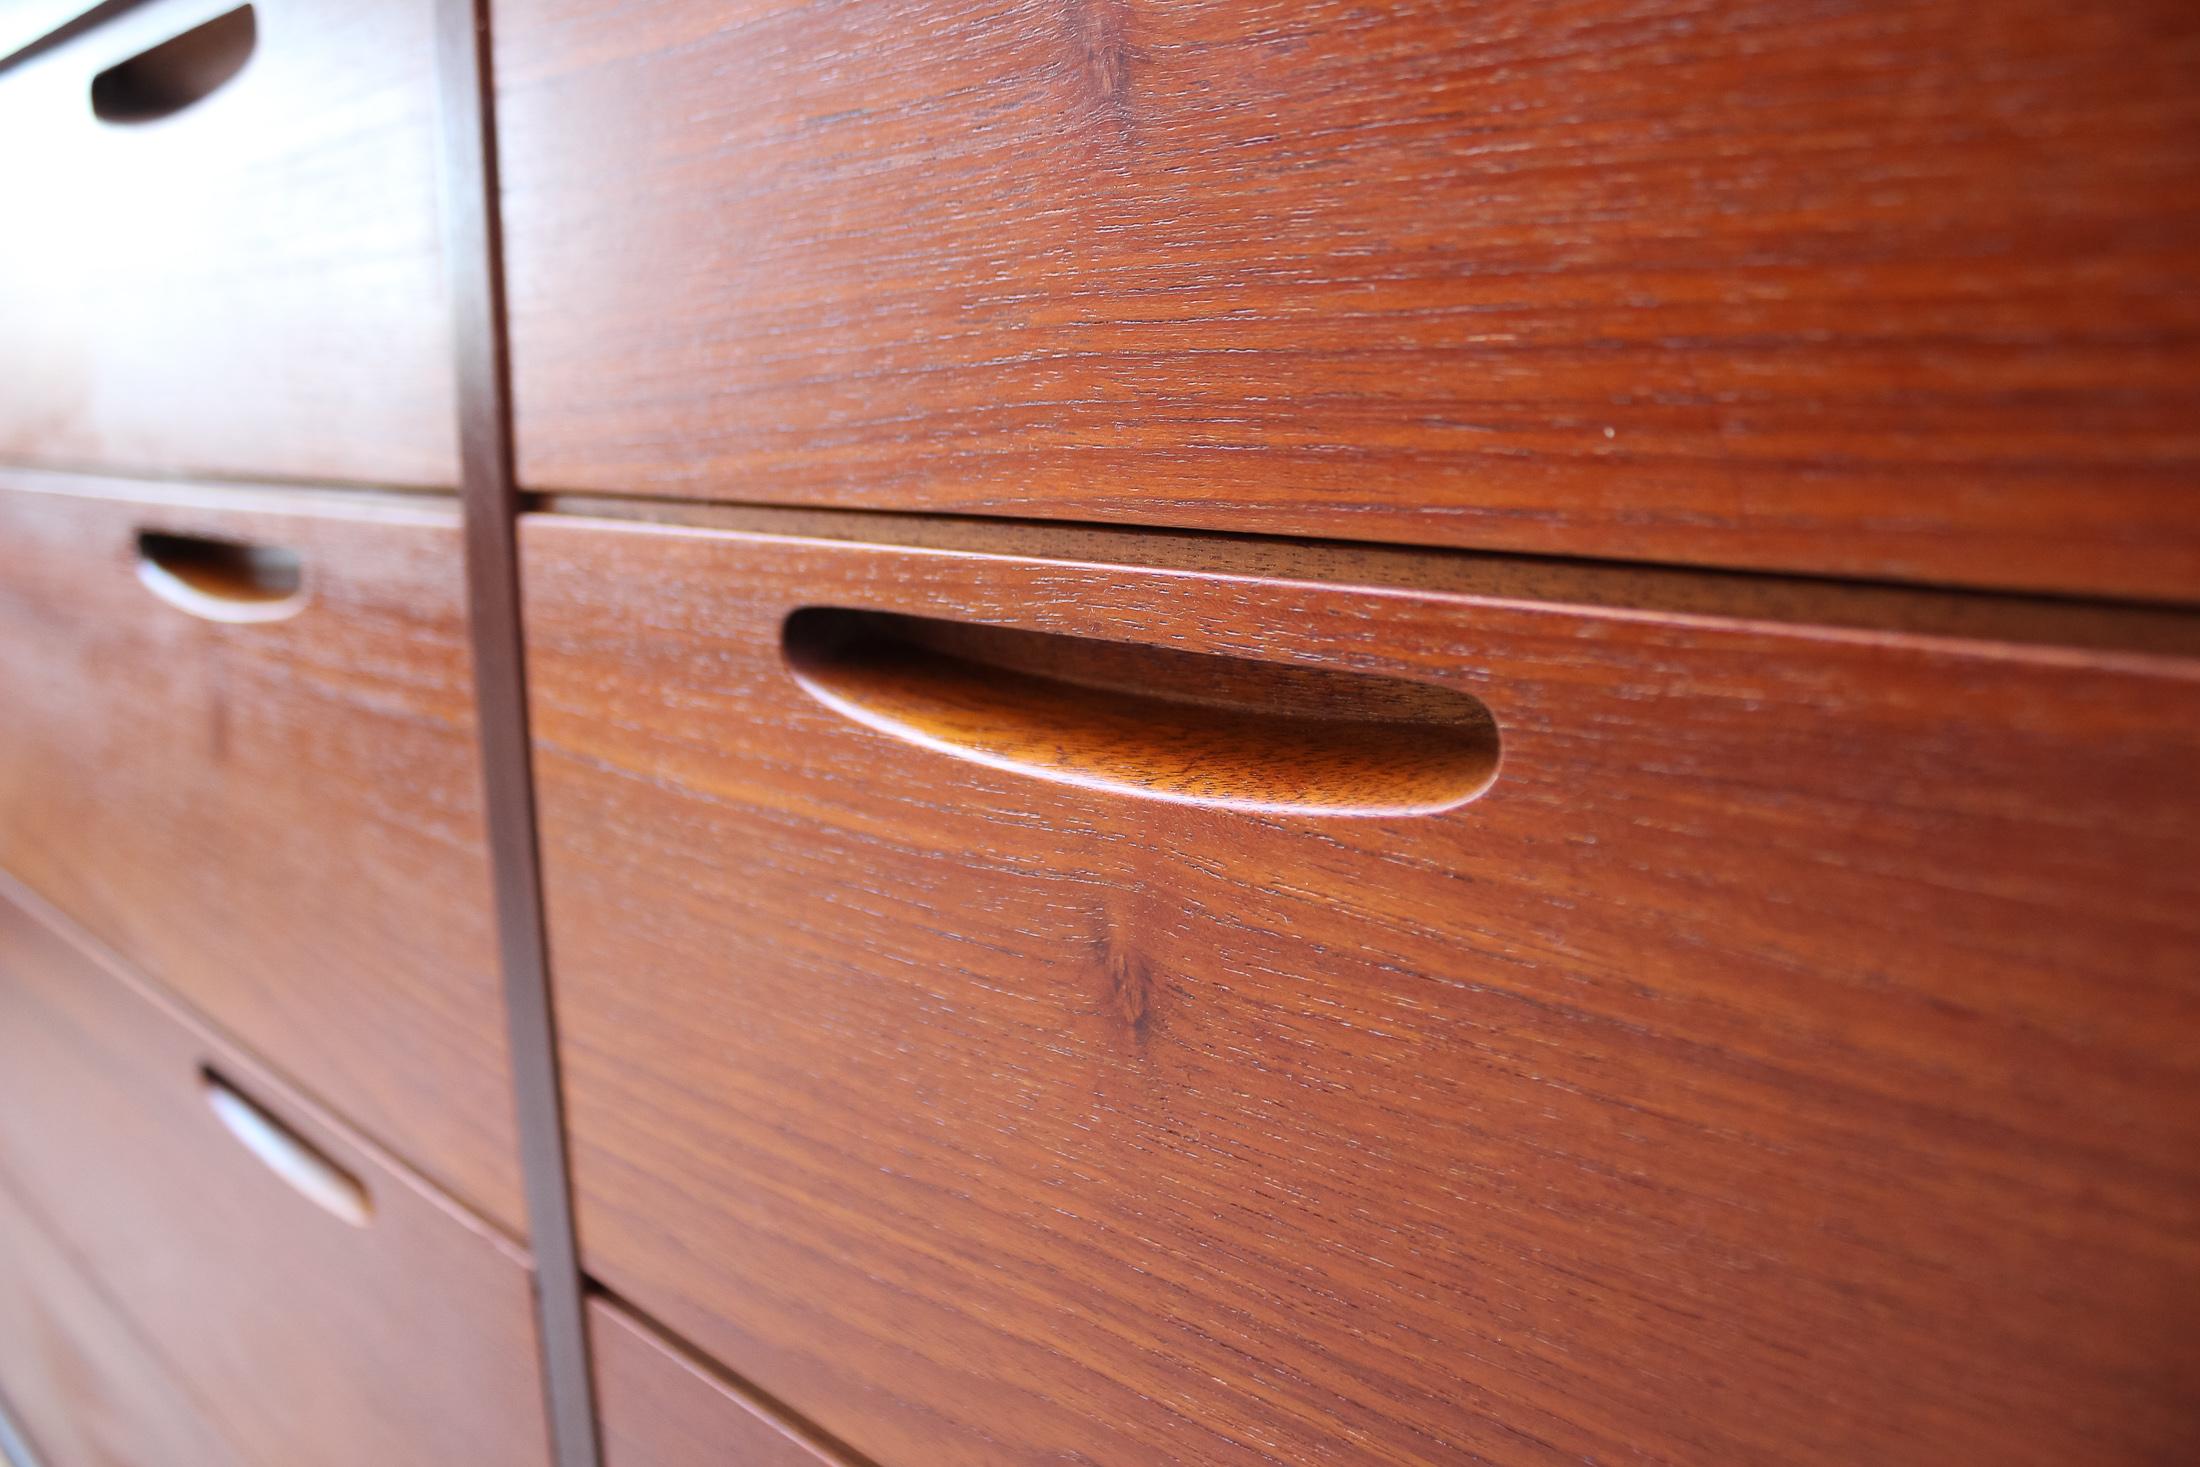 The Ib Kofod-Larsen Teak 8-Drawer Credenza, crafted by the esteemed Brande Mobelfabrik, is a stunning example of mid-century modern design. Dating back to the mid-20th century, this piece is an excellent representation of the minimalist, functional